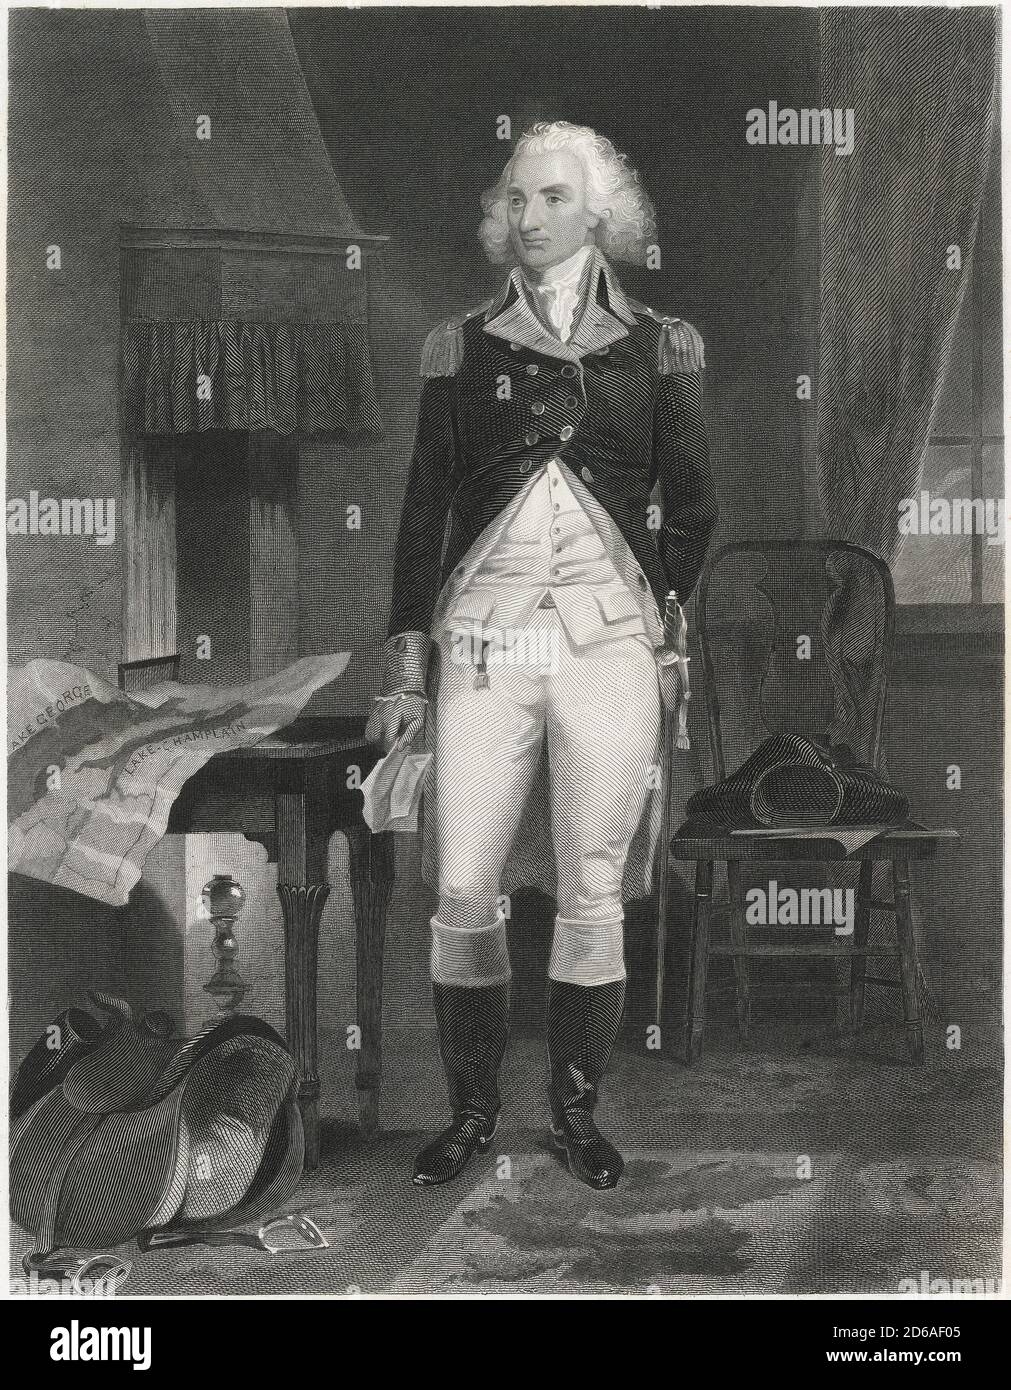 Antique c1870 engraving, Philip Schuyler. Philip John Schuyler (1733-1804) was an American general in the Revolutionary War and a United States Senator from New York. SOURCE: ORIGINAL ENGRAVING Stock Photo